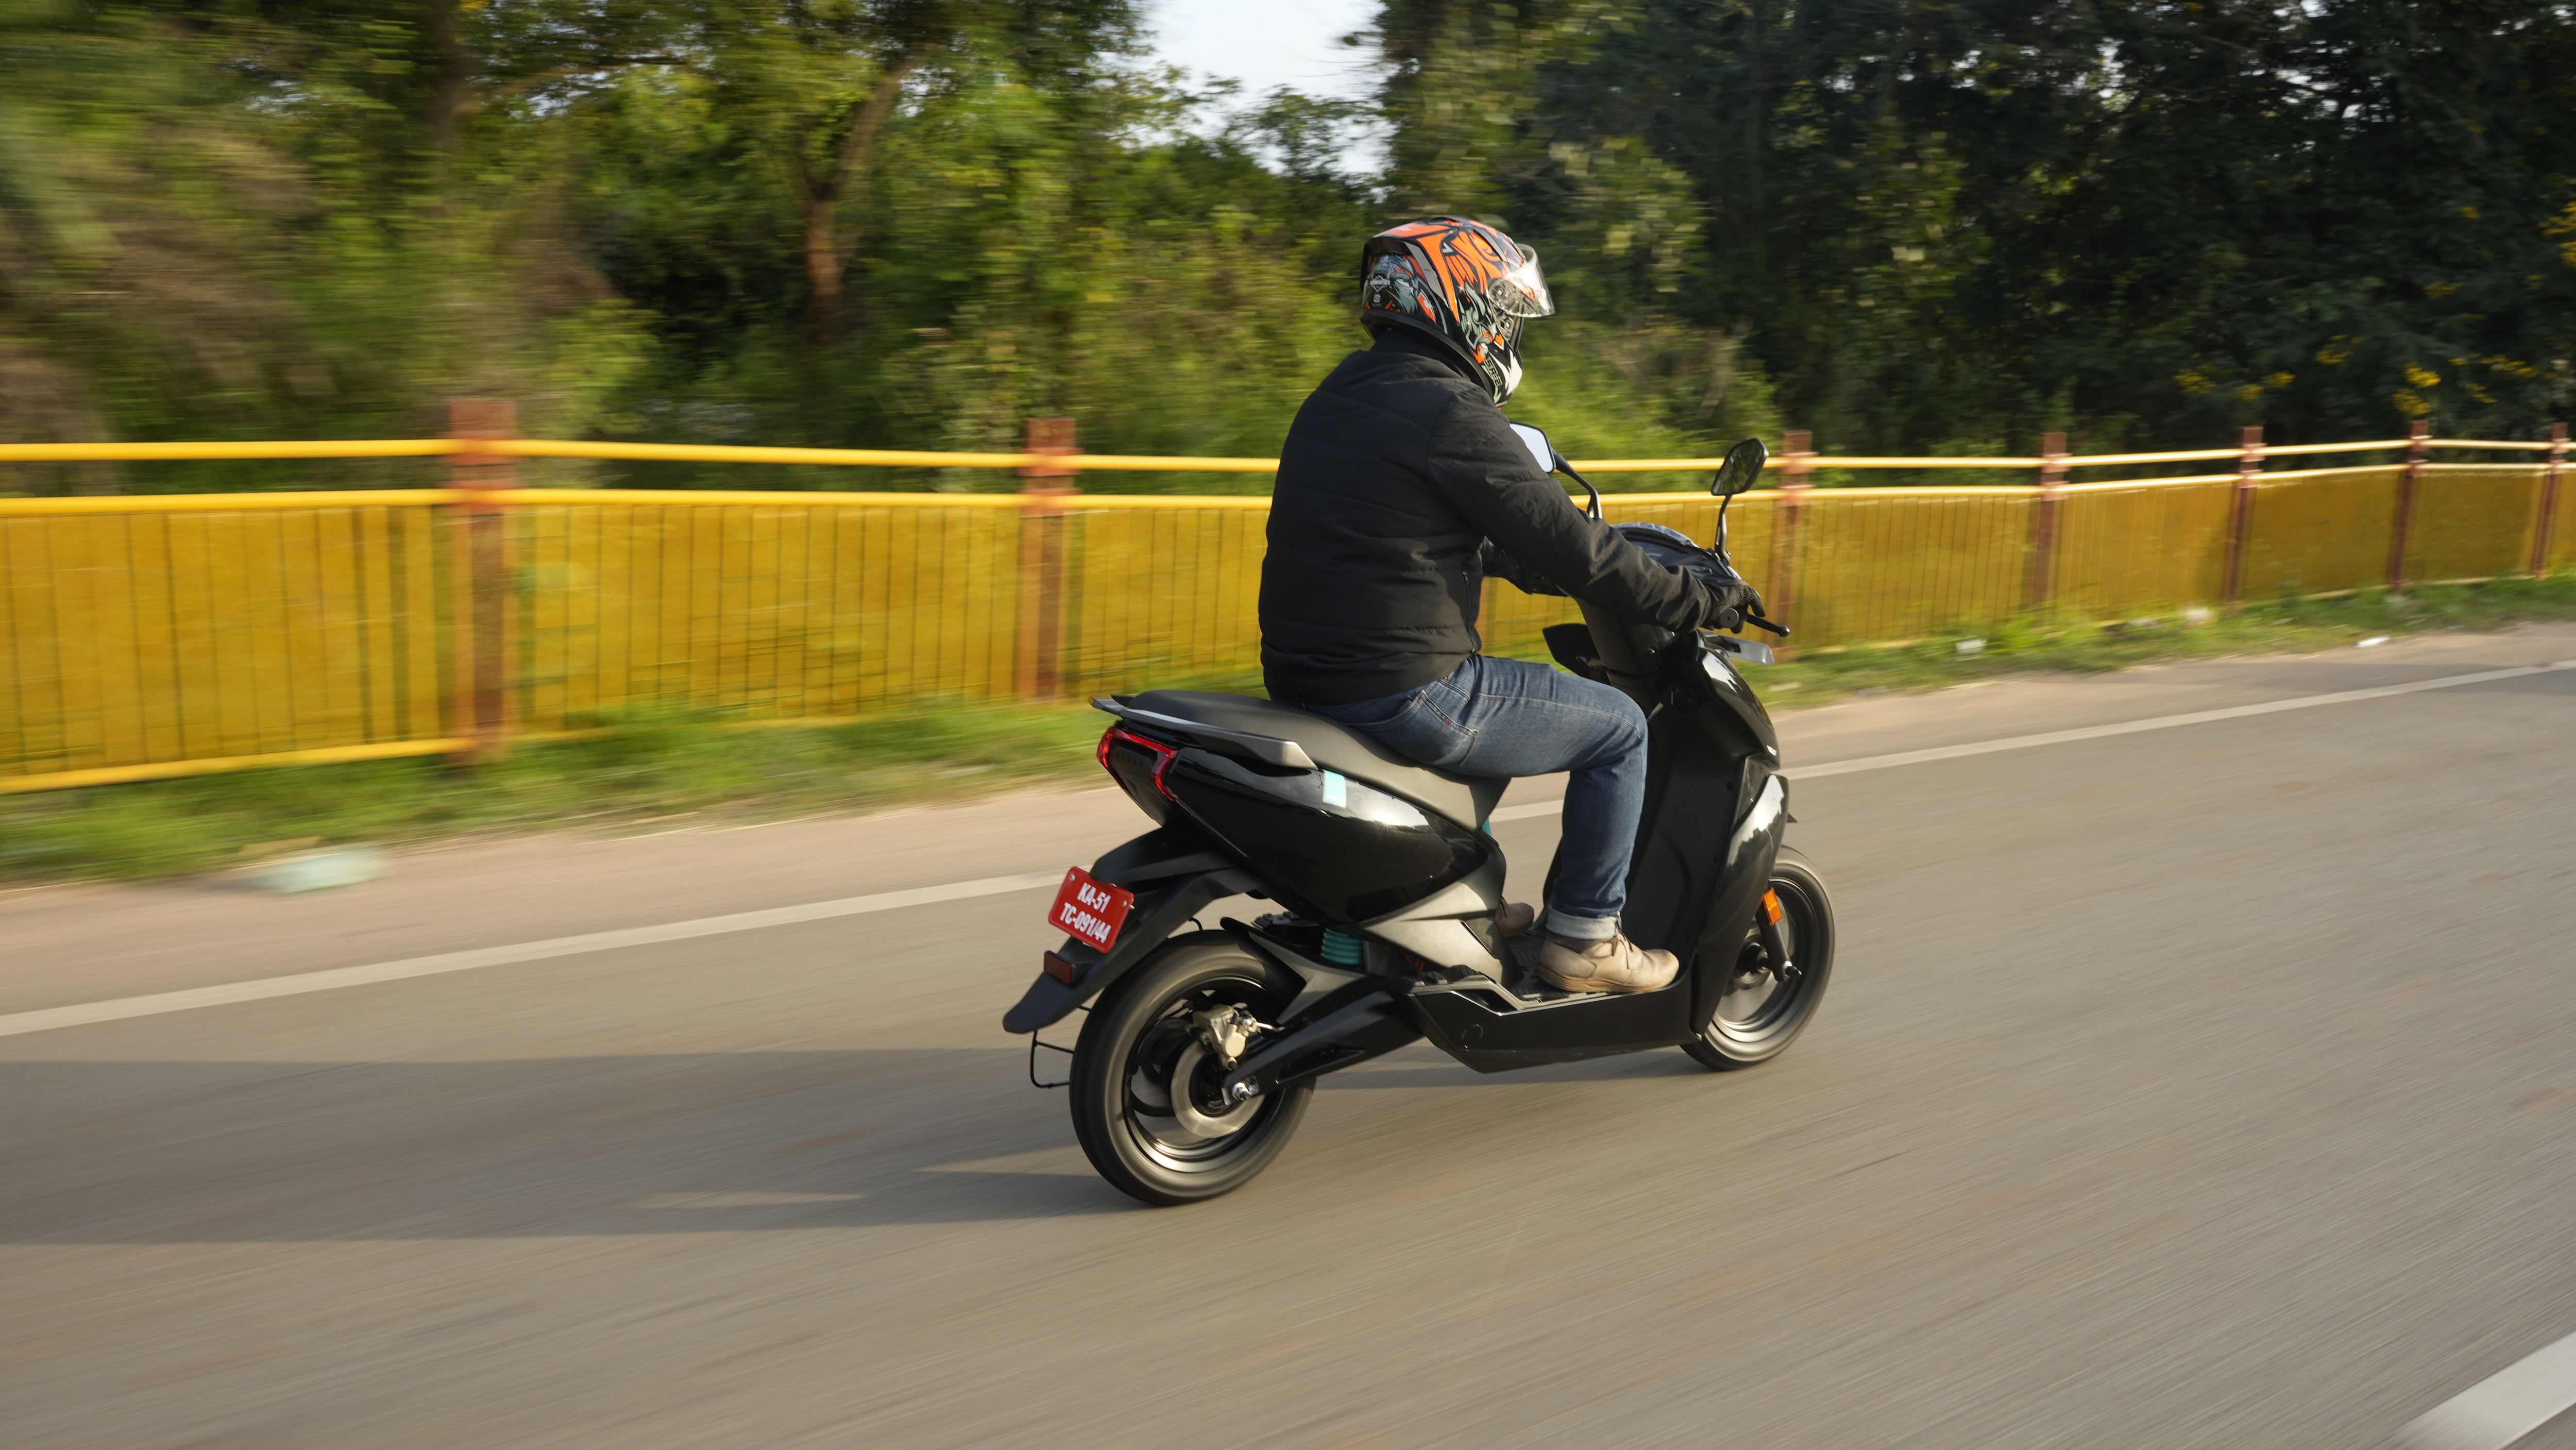 Ather 450S can reach a top speed of 90 kmph in Sport mode and the acceleration of this electric scooter is smooth and swift.